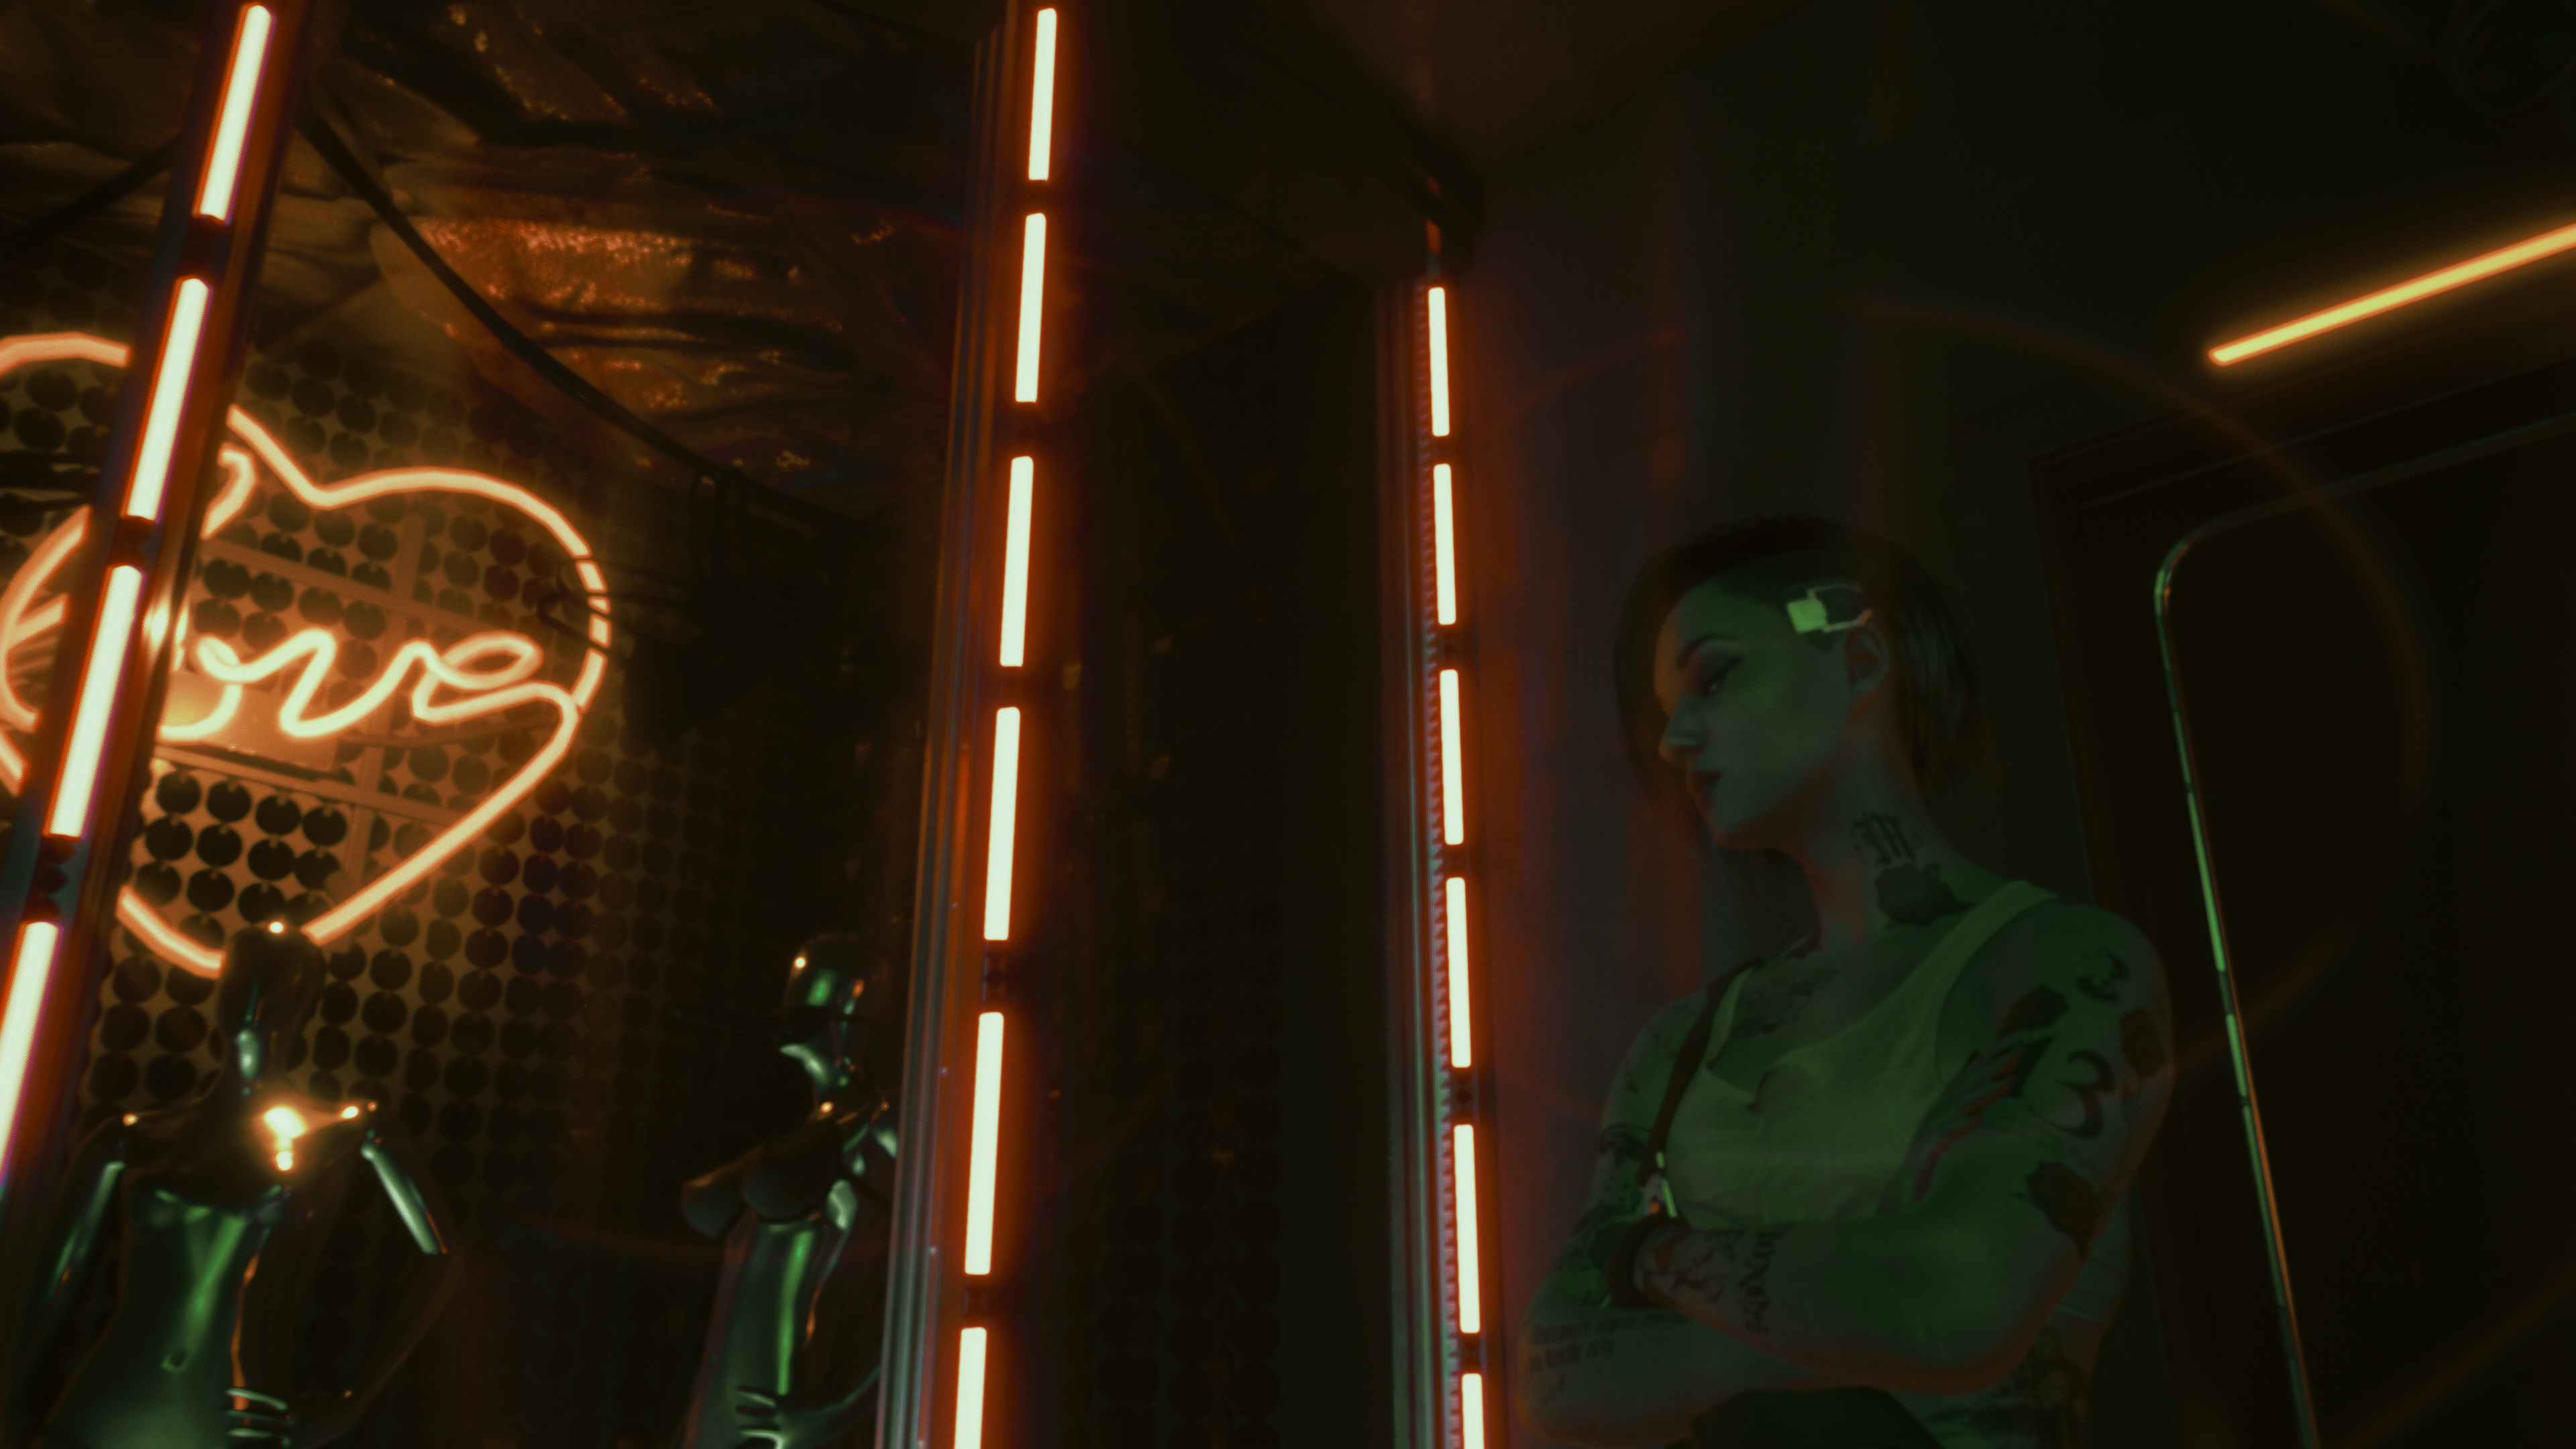 General 3840x2160 Cyberpunk 2077 video games Judy Alvarez neon underground tattoo rose lights microchip cyber science fiction futuristic futuristic city people reflection relaxing punk video game characters